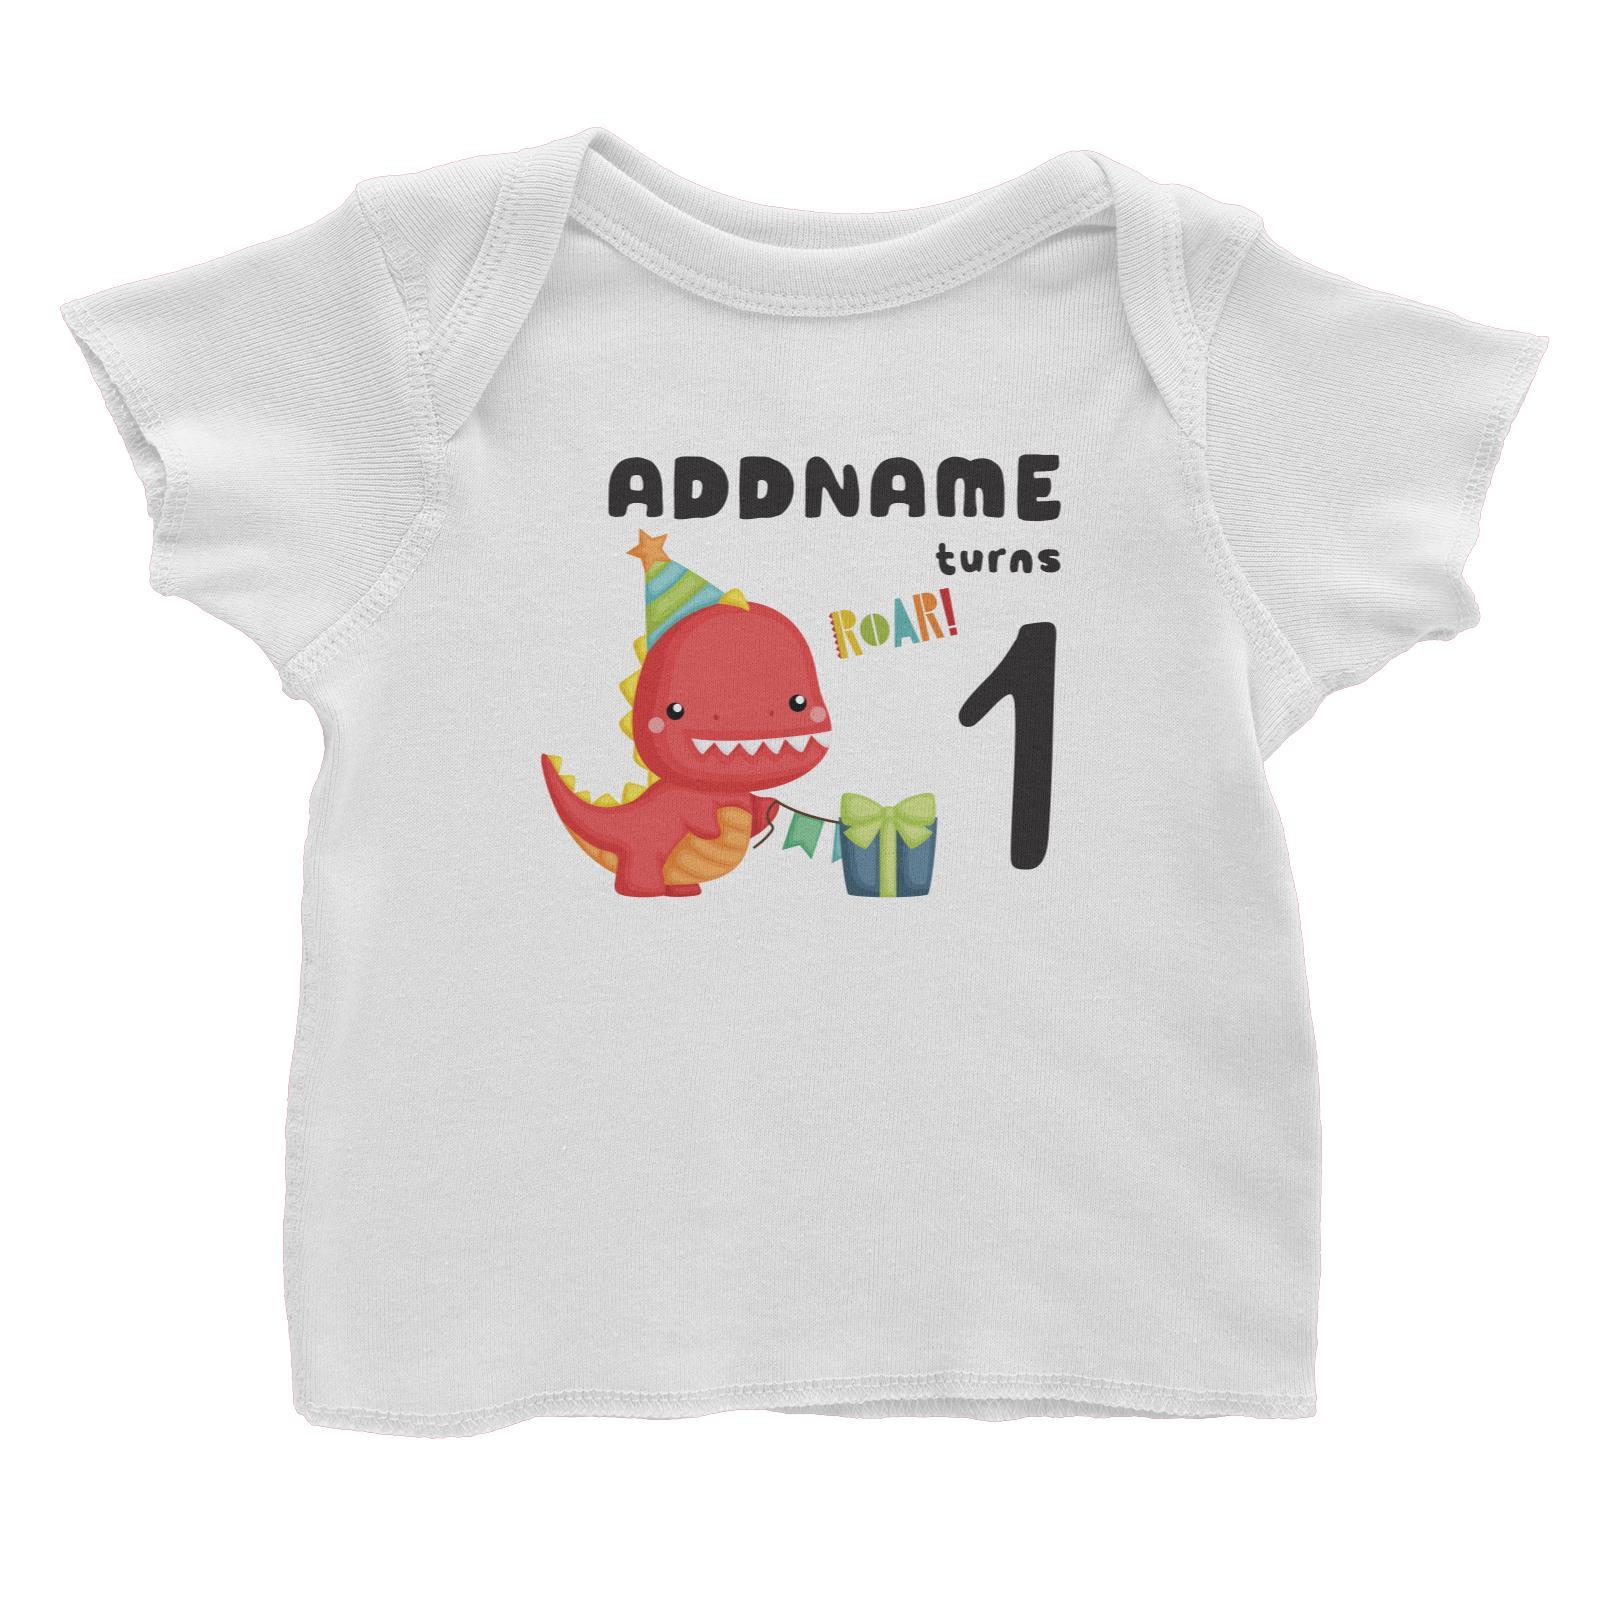 Birthday Dinosaur Happy Red Rex Wearing Party Hat Addname Turns 1 Baby T-Shirt